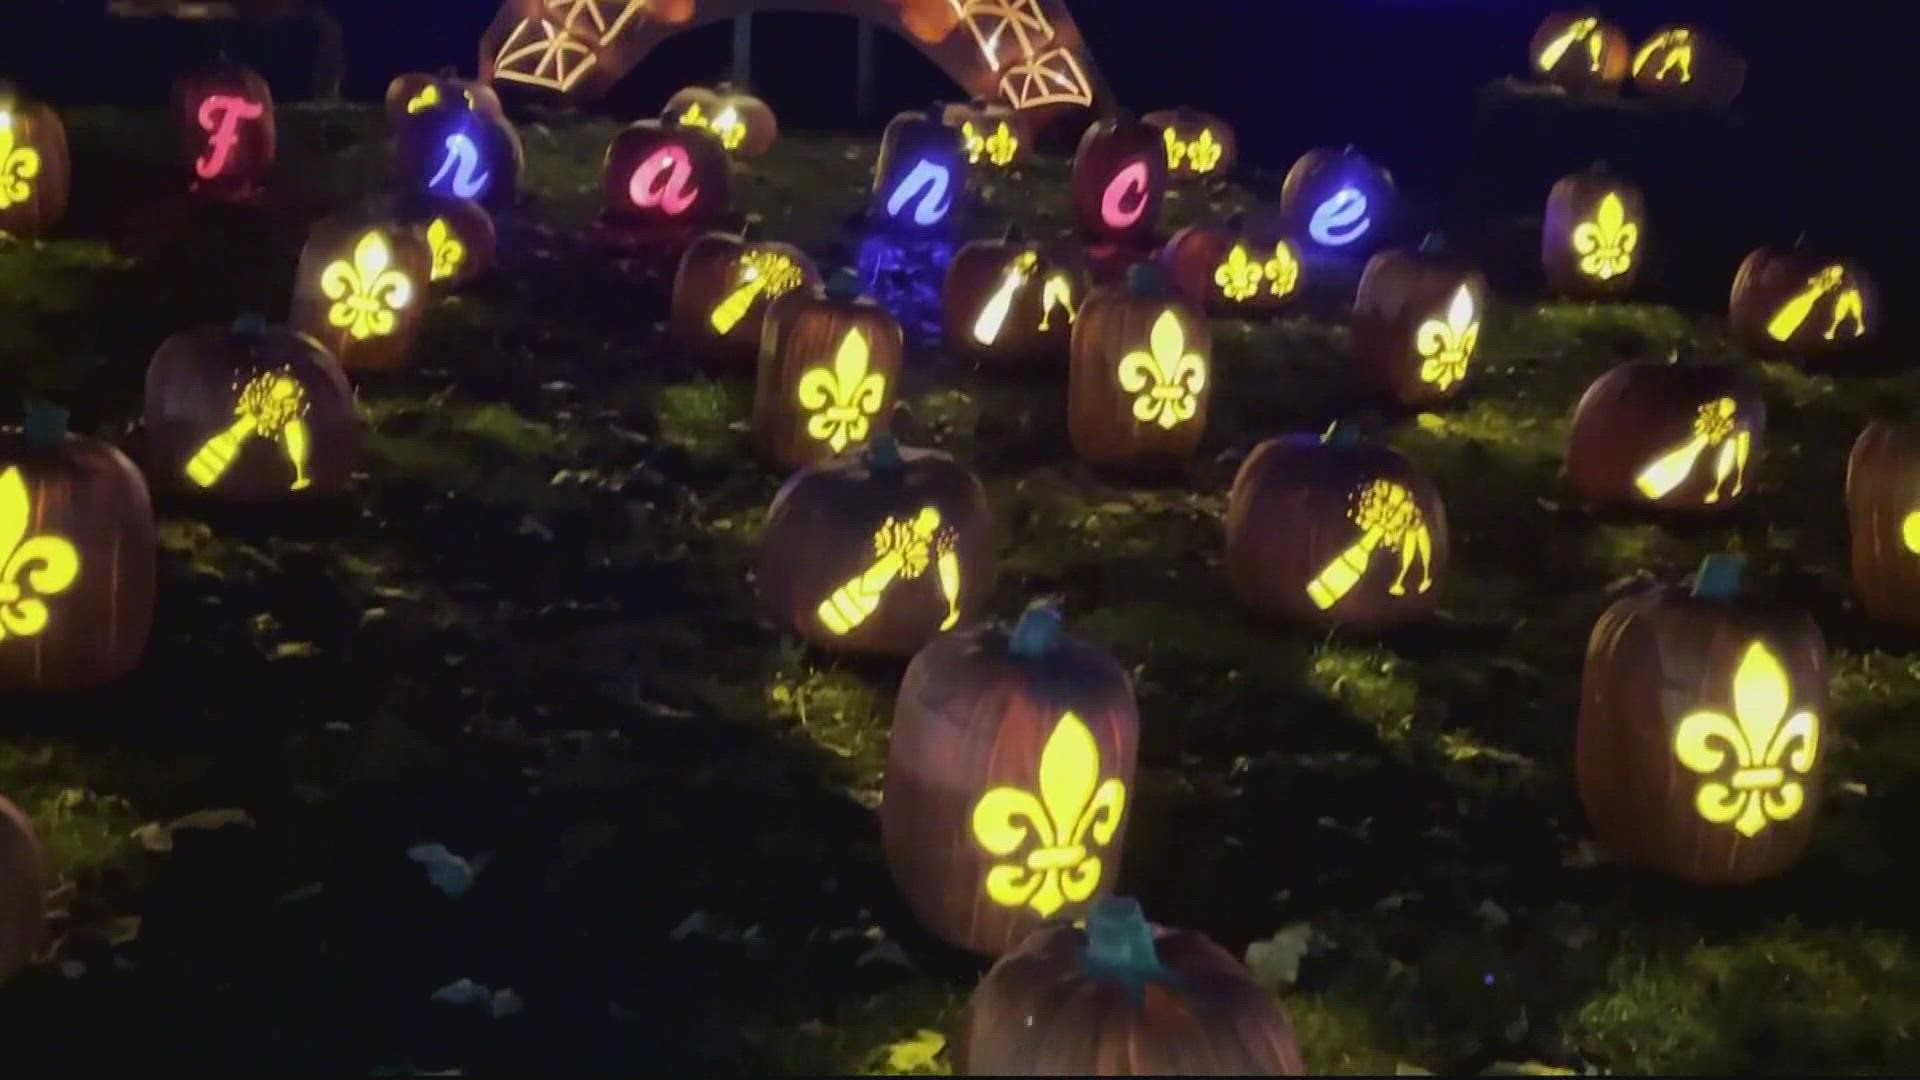 Organizers say more than 50 carvers and designers used about 4-THOUSAND pumpkins to create 20 displays featuring iconic sites around the world.